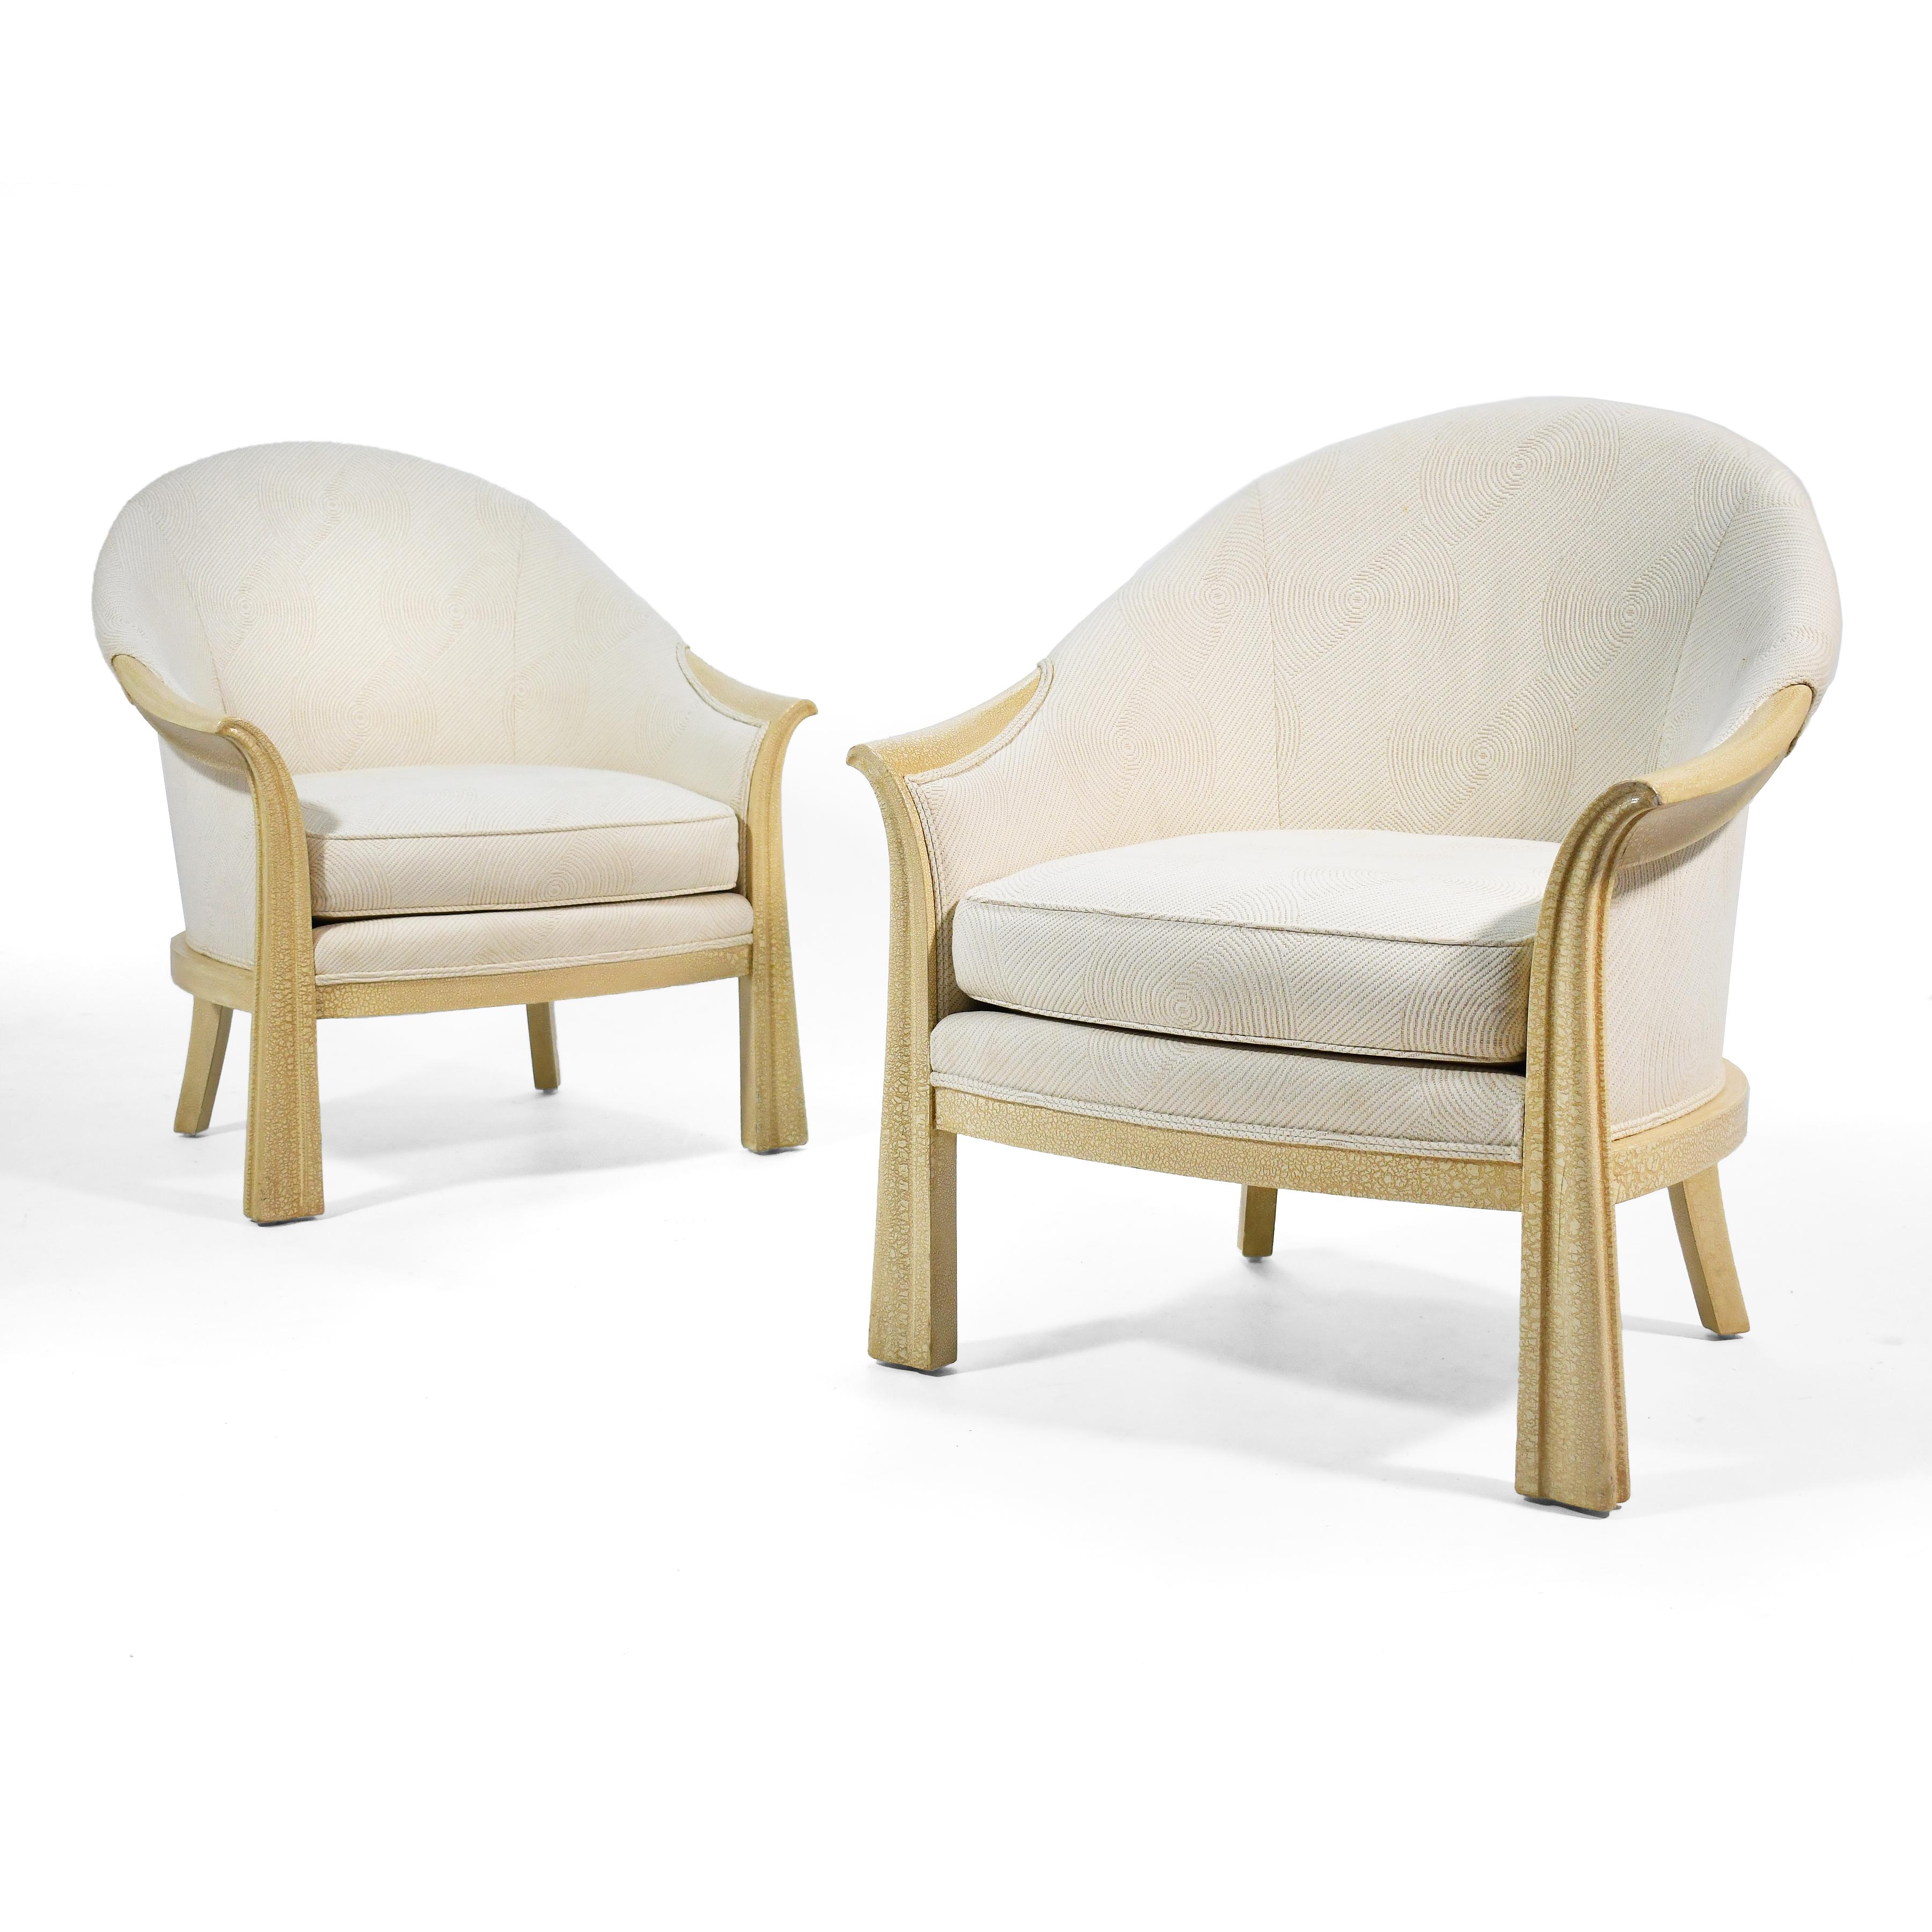 Pair of Lounge Chairs in the Manner of Pierre Chareau For Sale 1